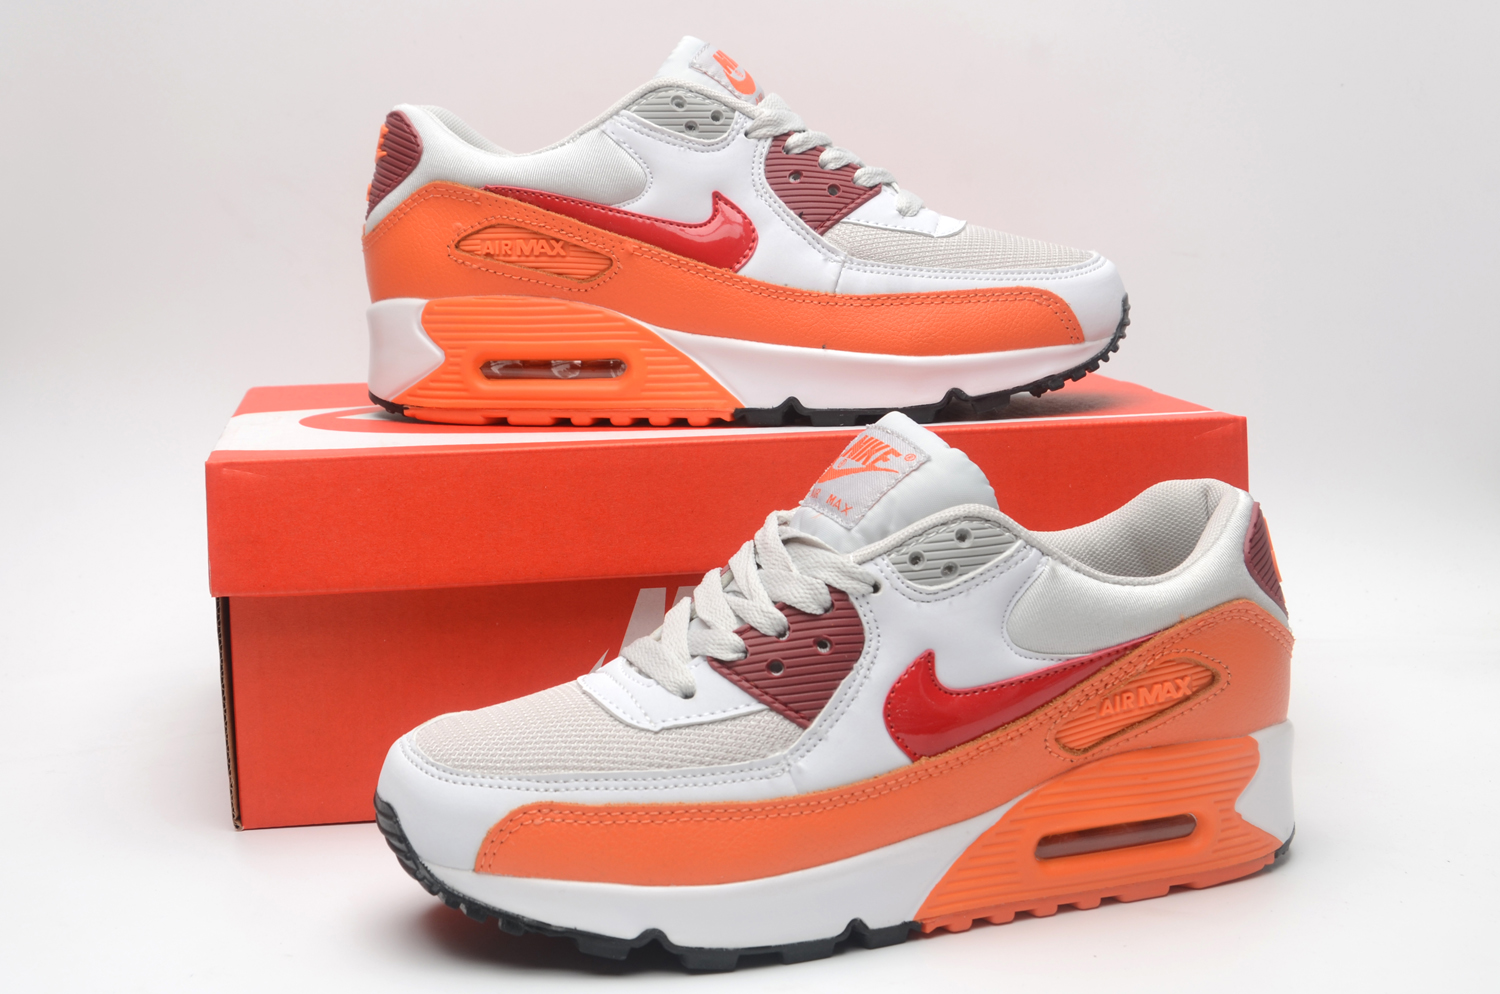 Women's Running weapon Air Max 90 Shoes 031